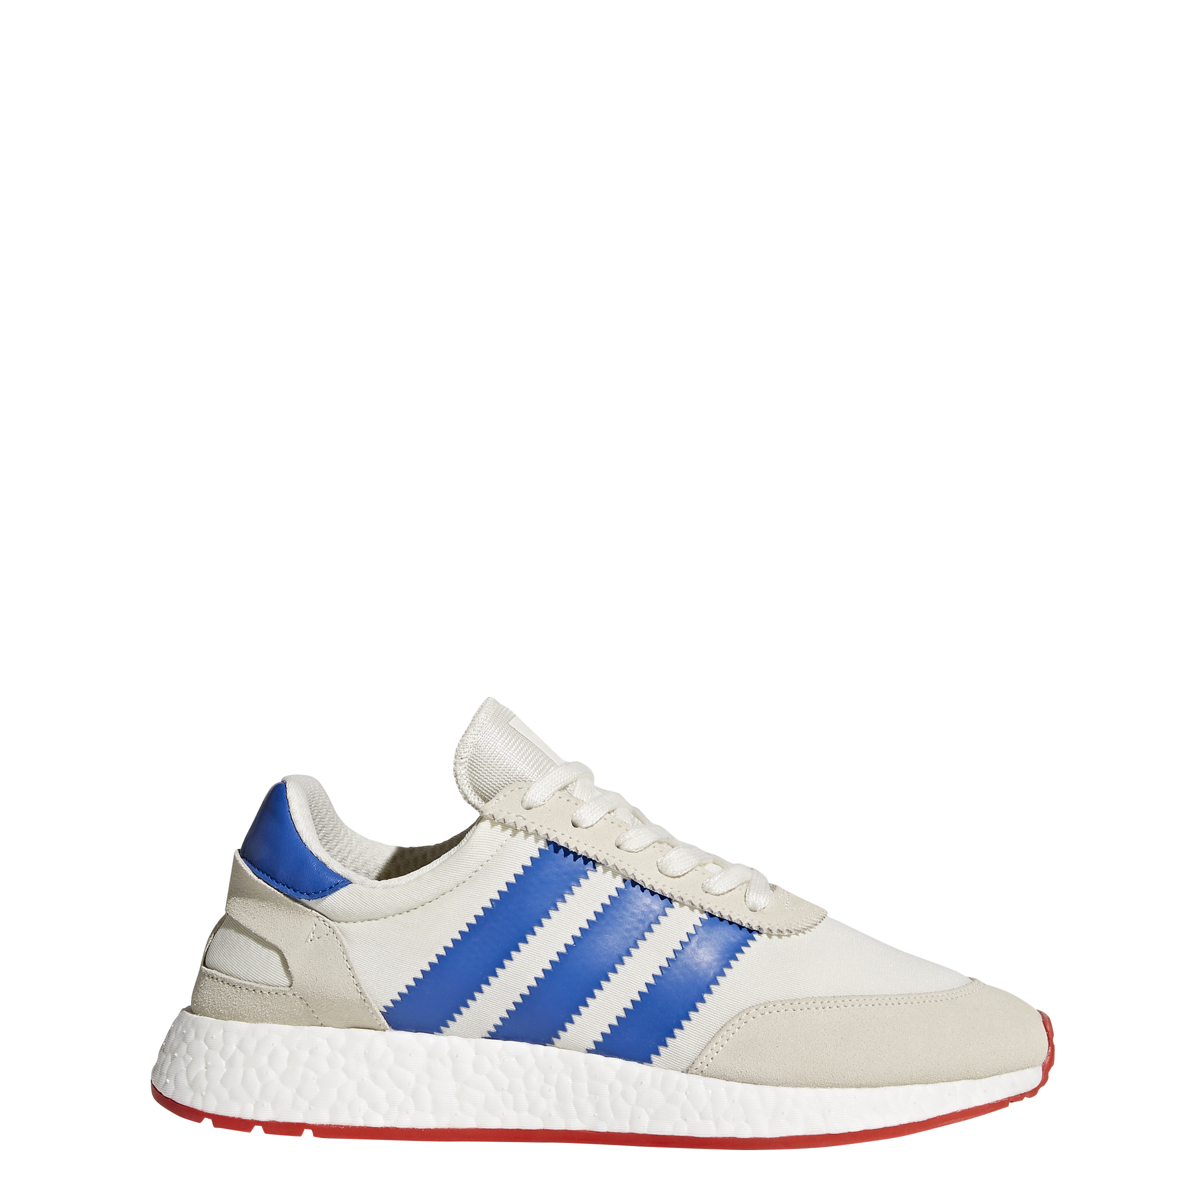 adidas i 5923 off white blue core red